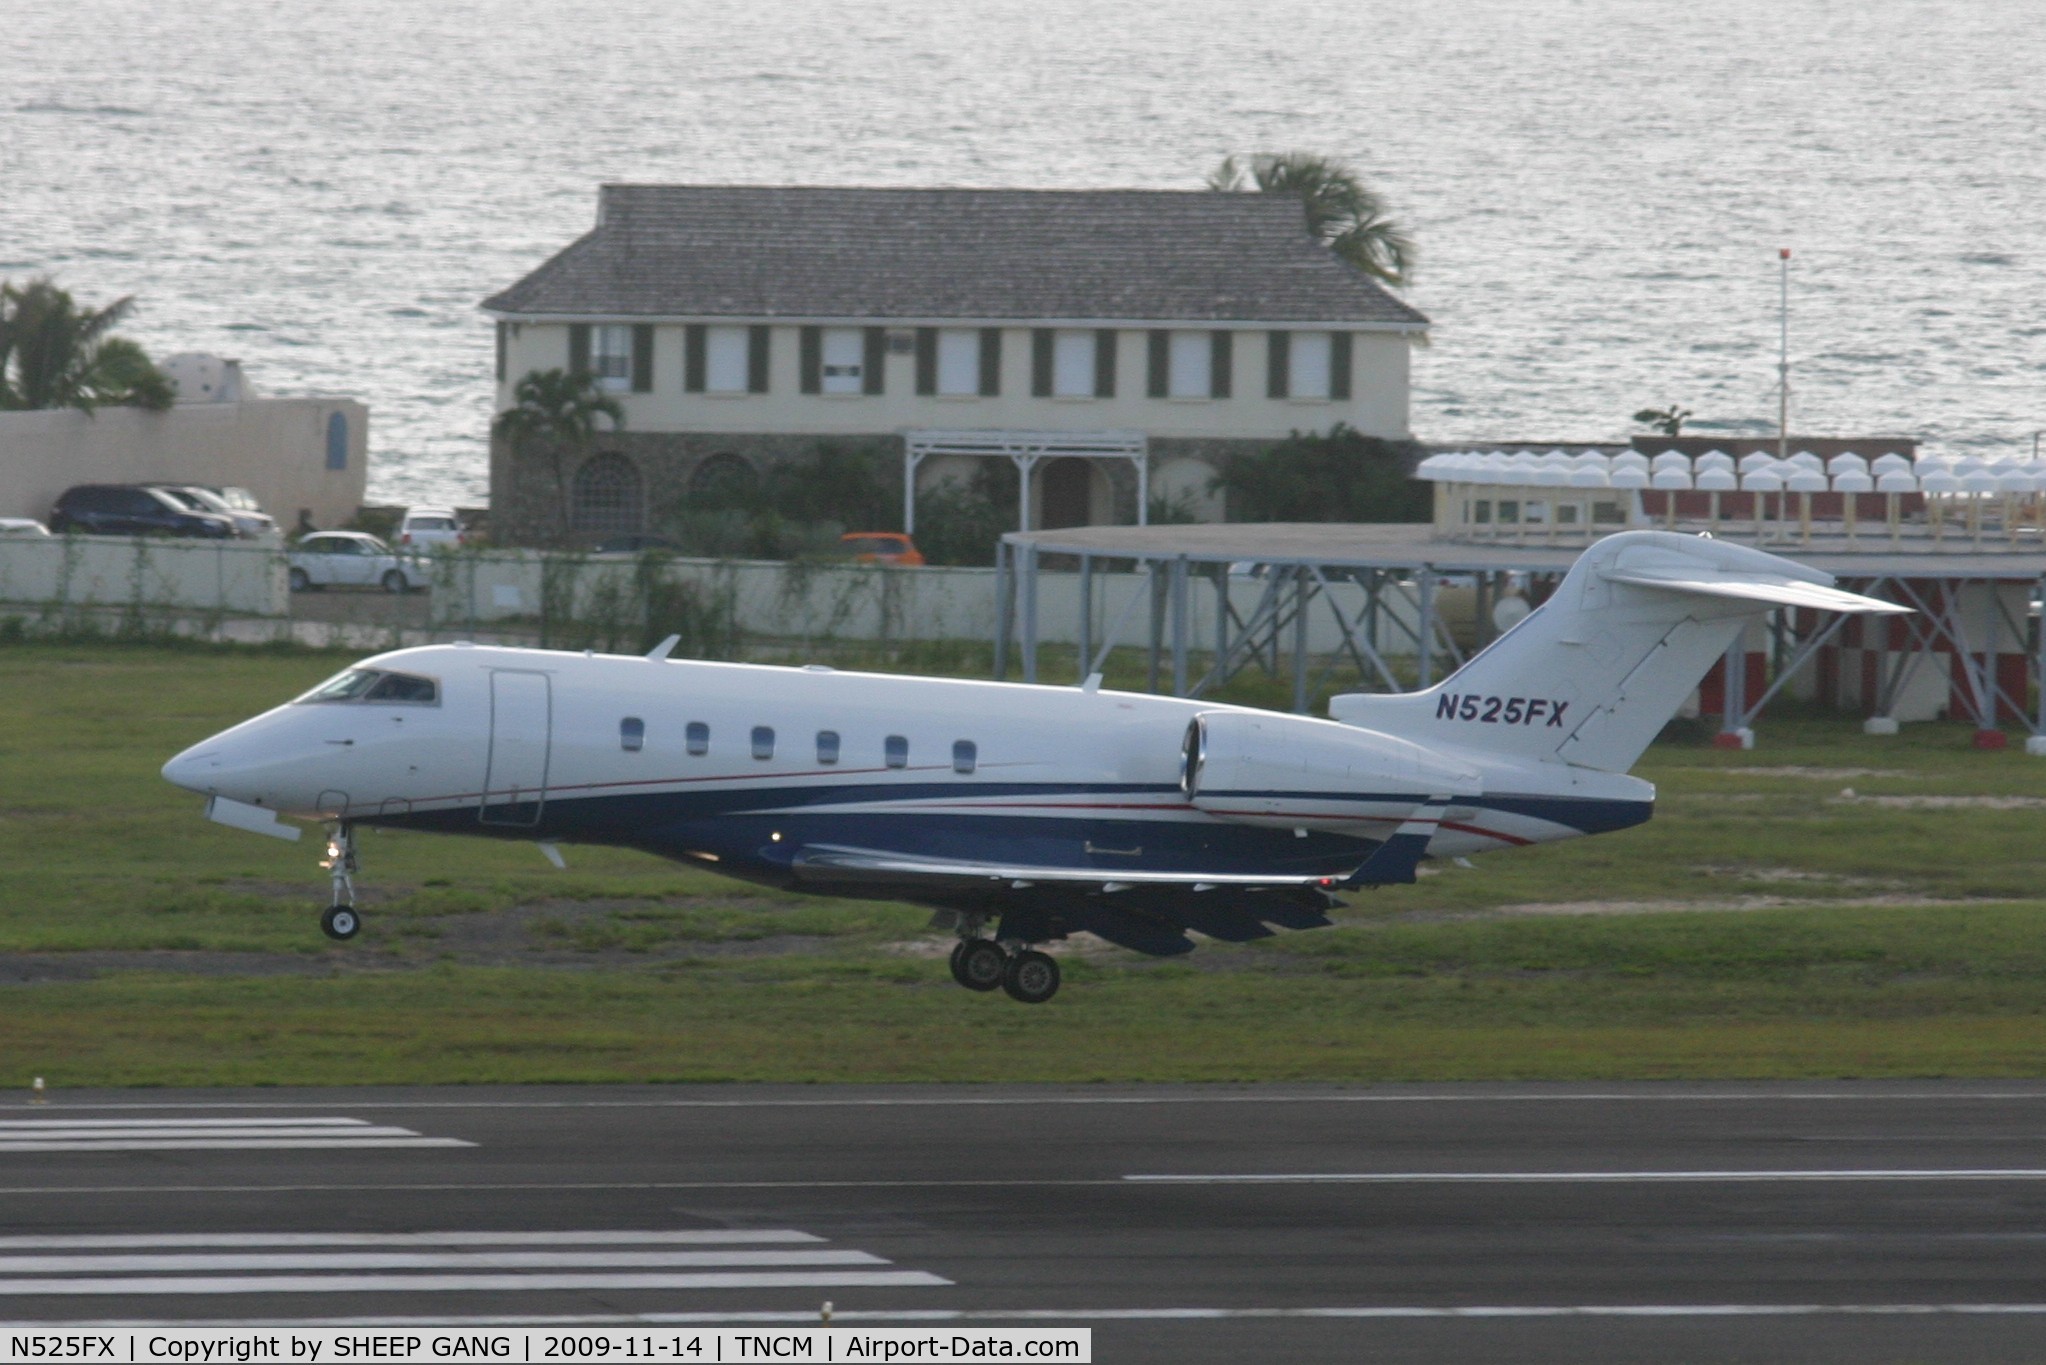 N525FX, 2006 Bombardier Challenger 300 (BD-100-1A10) C/N 20112, gliding over the tresh hold on to runway 10 tncm